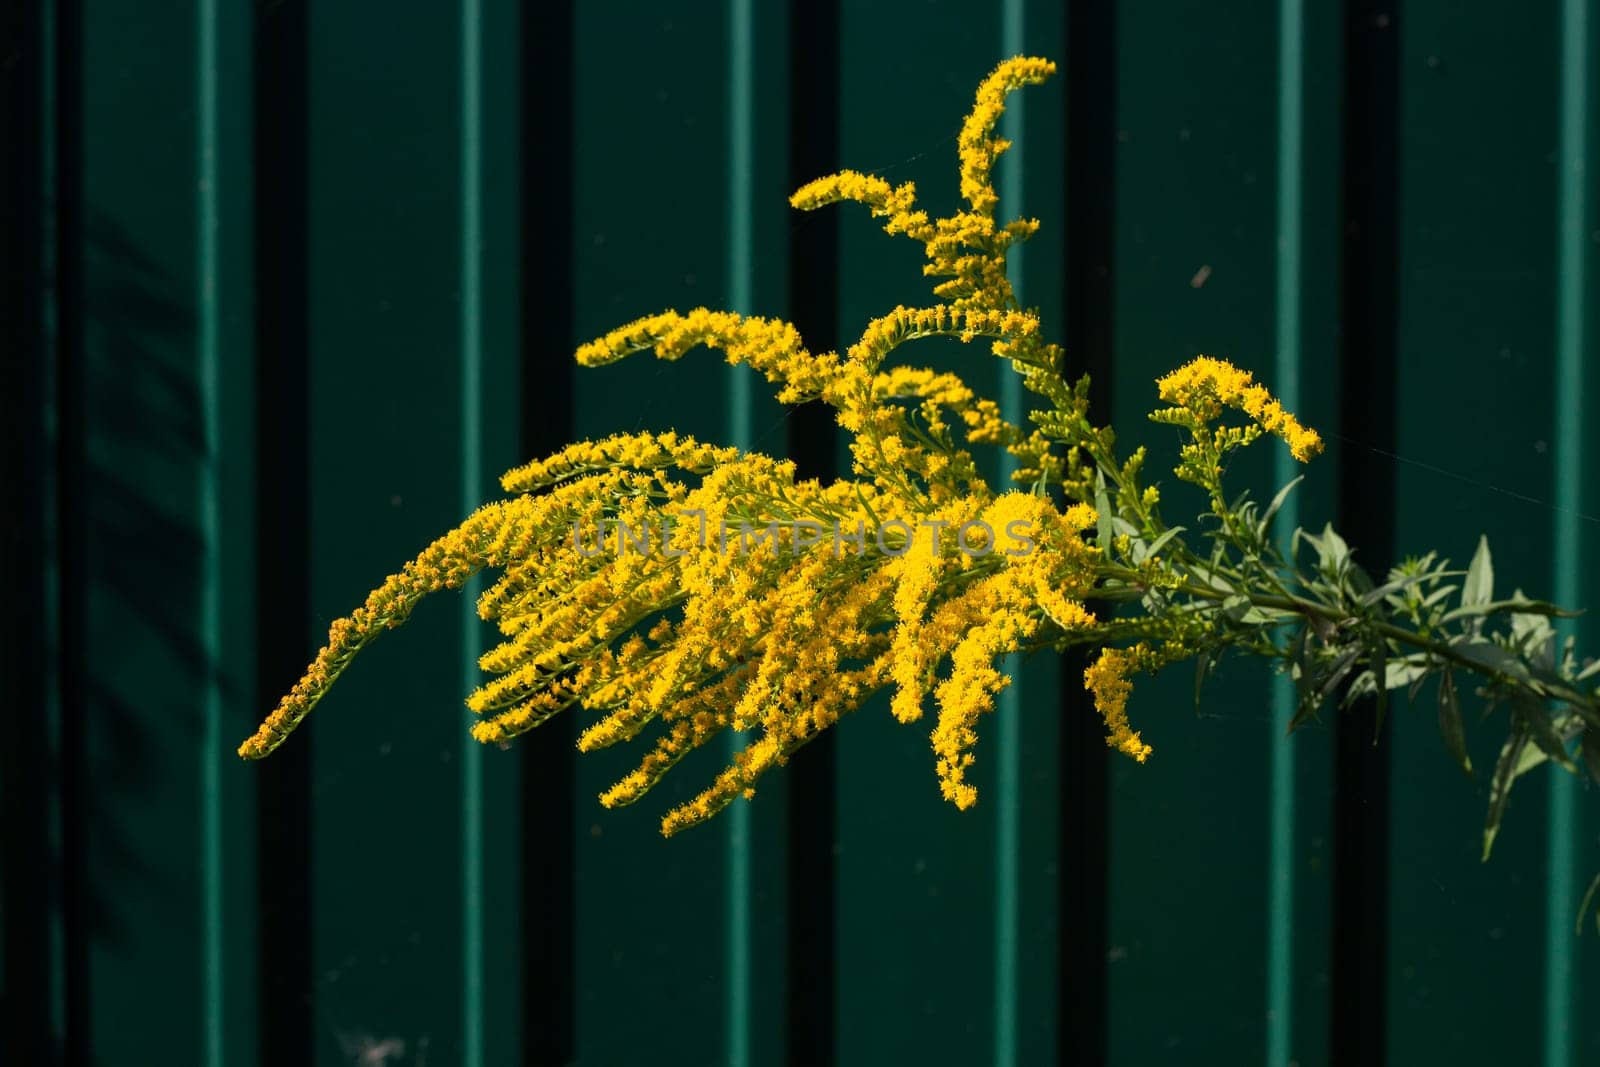 Yellow wild flowers against the background of a green corrugated fence. Abstraction. Plants and metal.